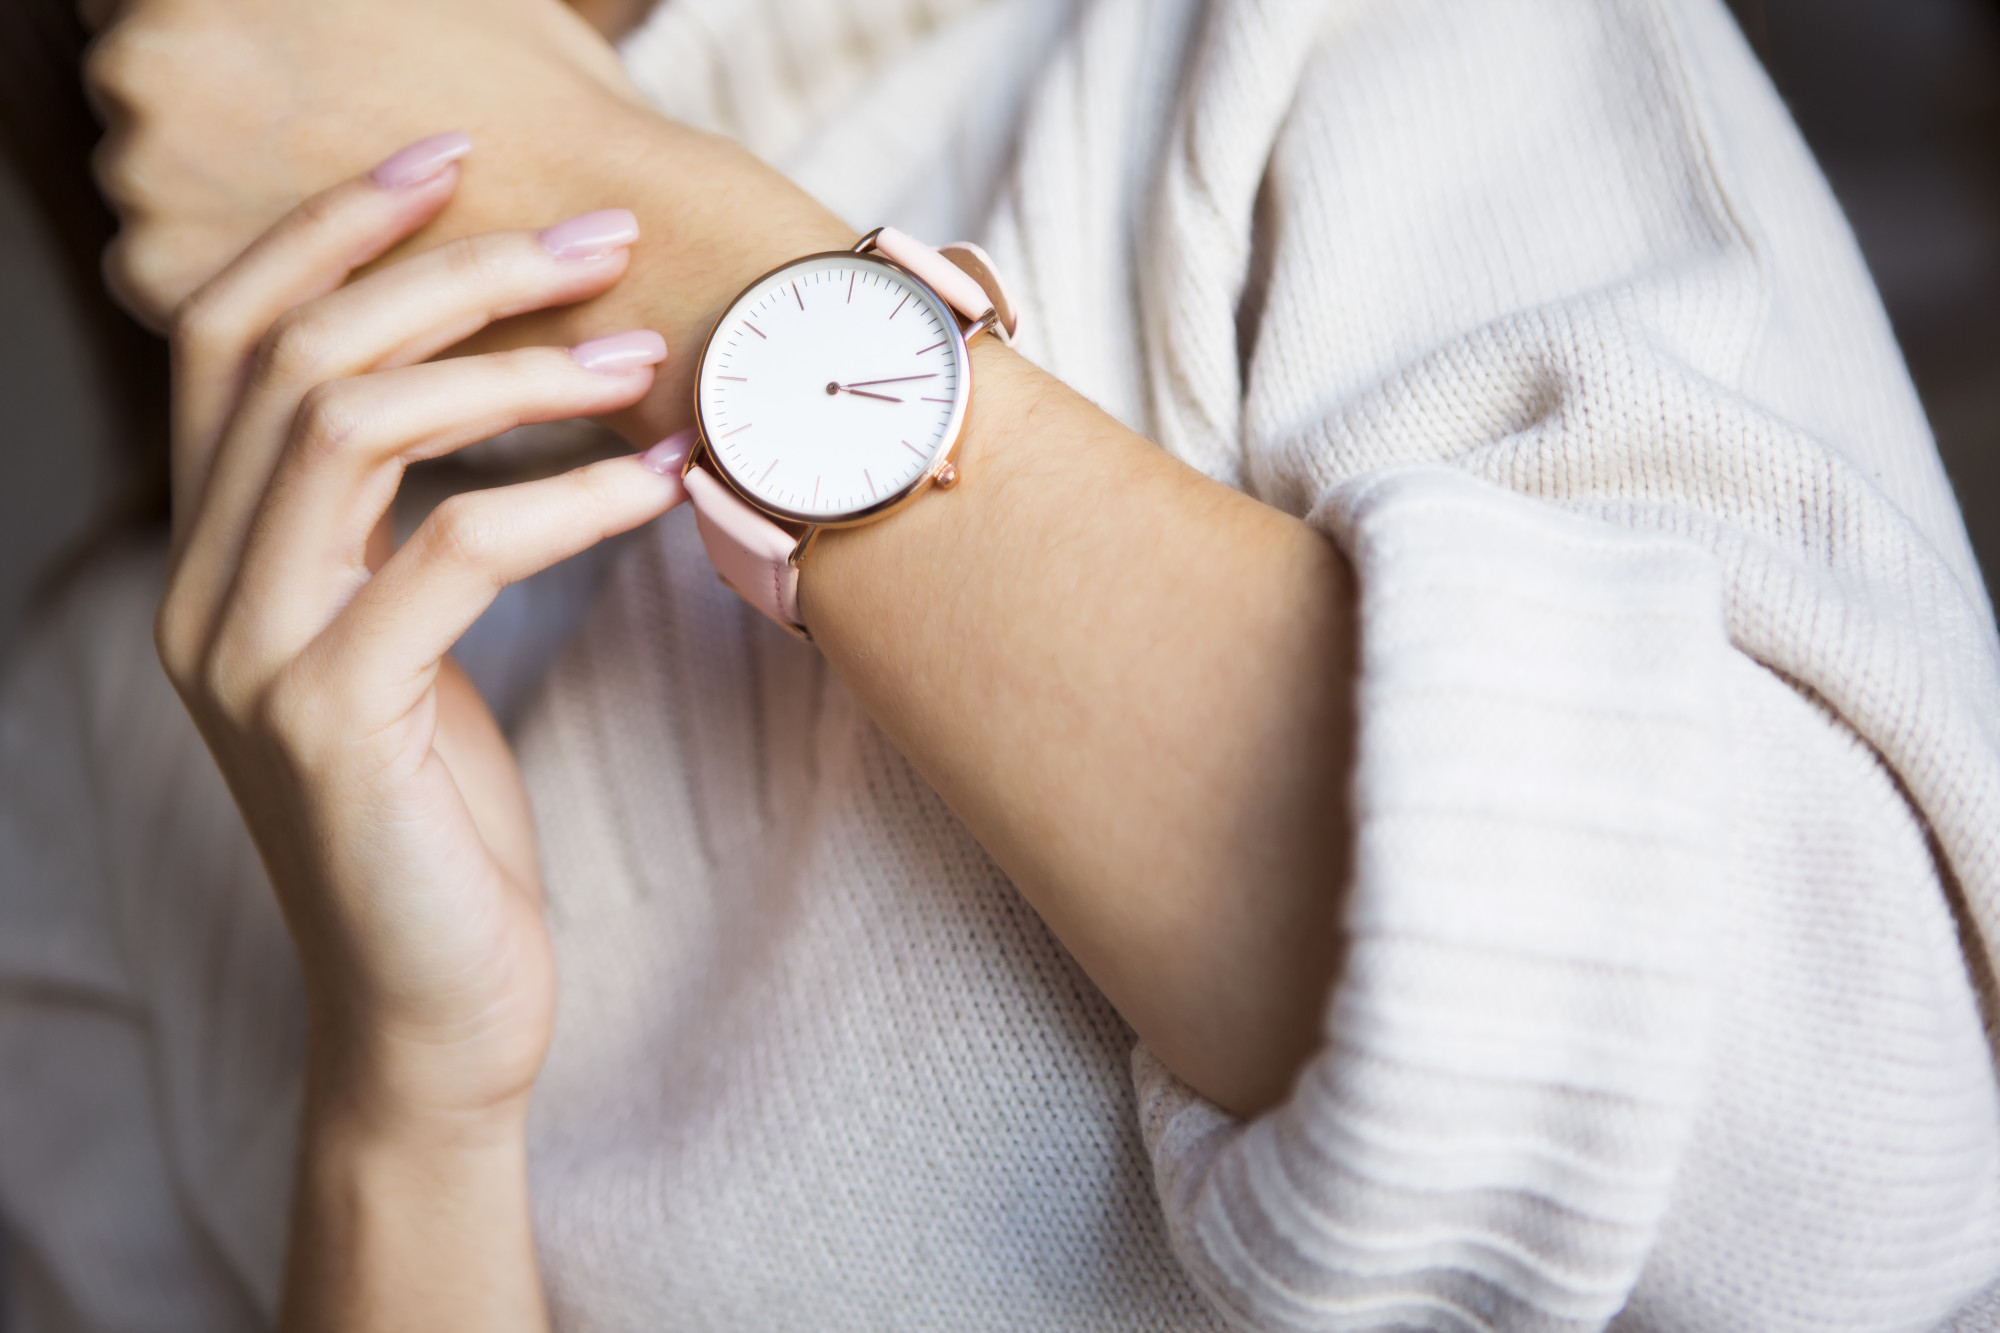 Accessorize with the Best: A Guide to Choosing the Most Stylish Watches for Women